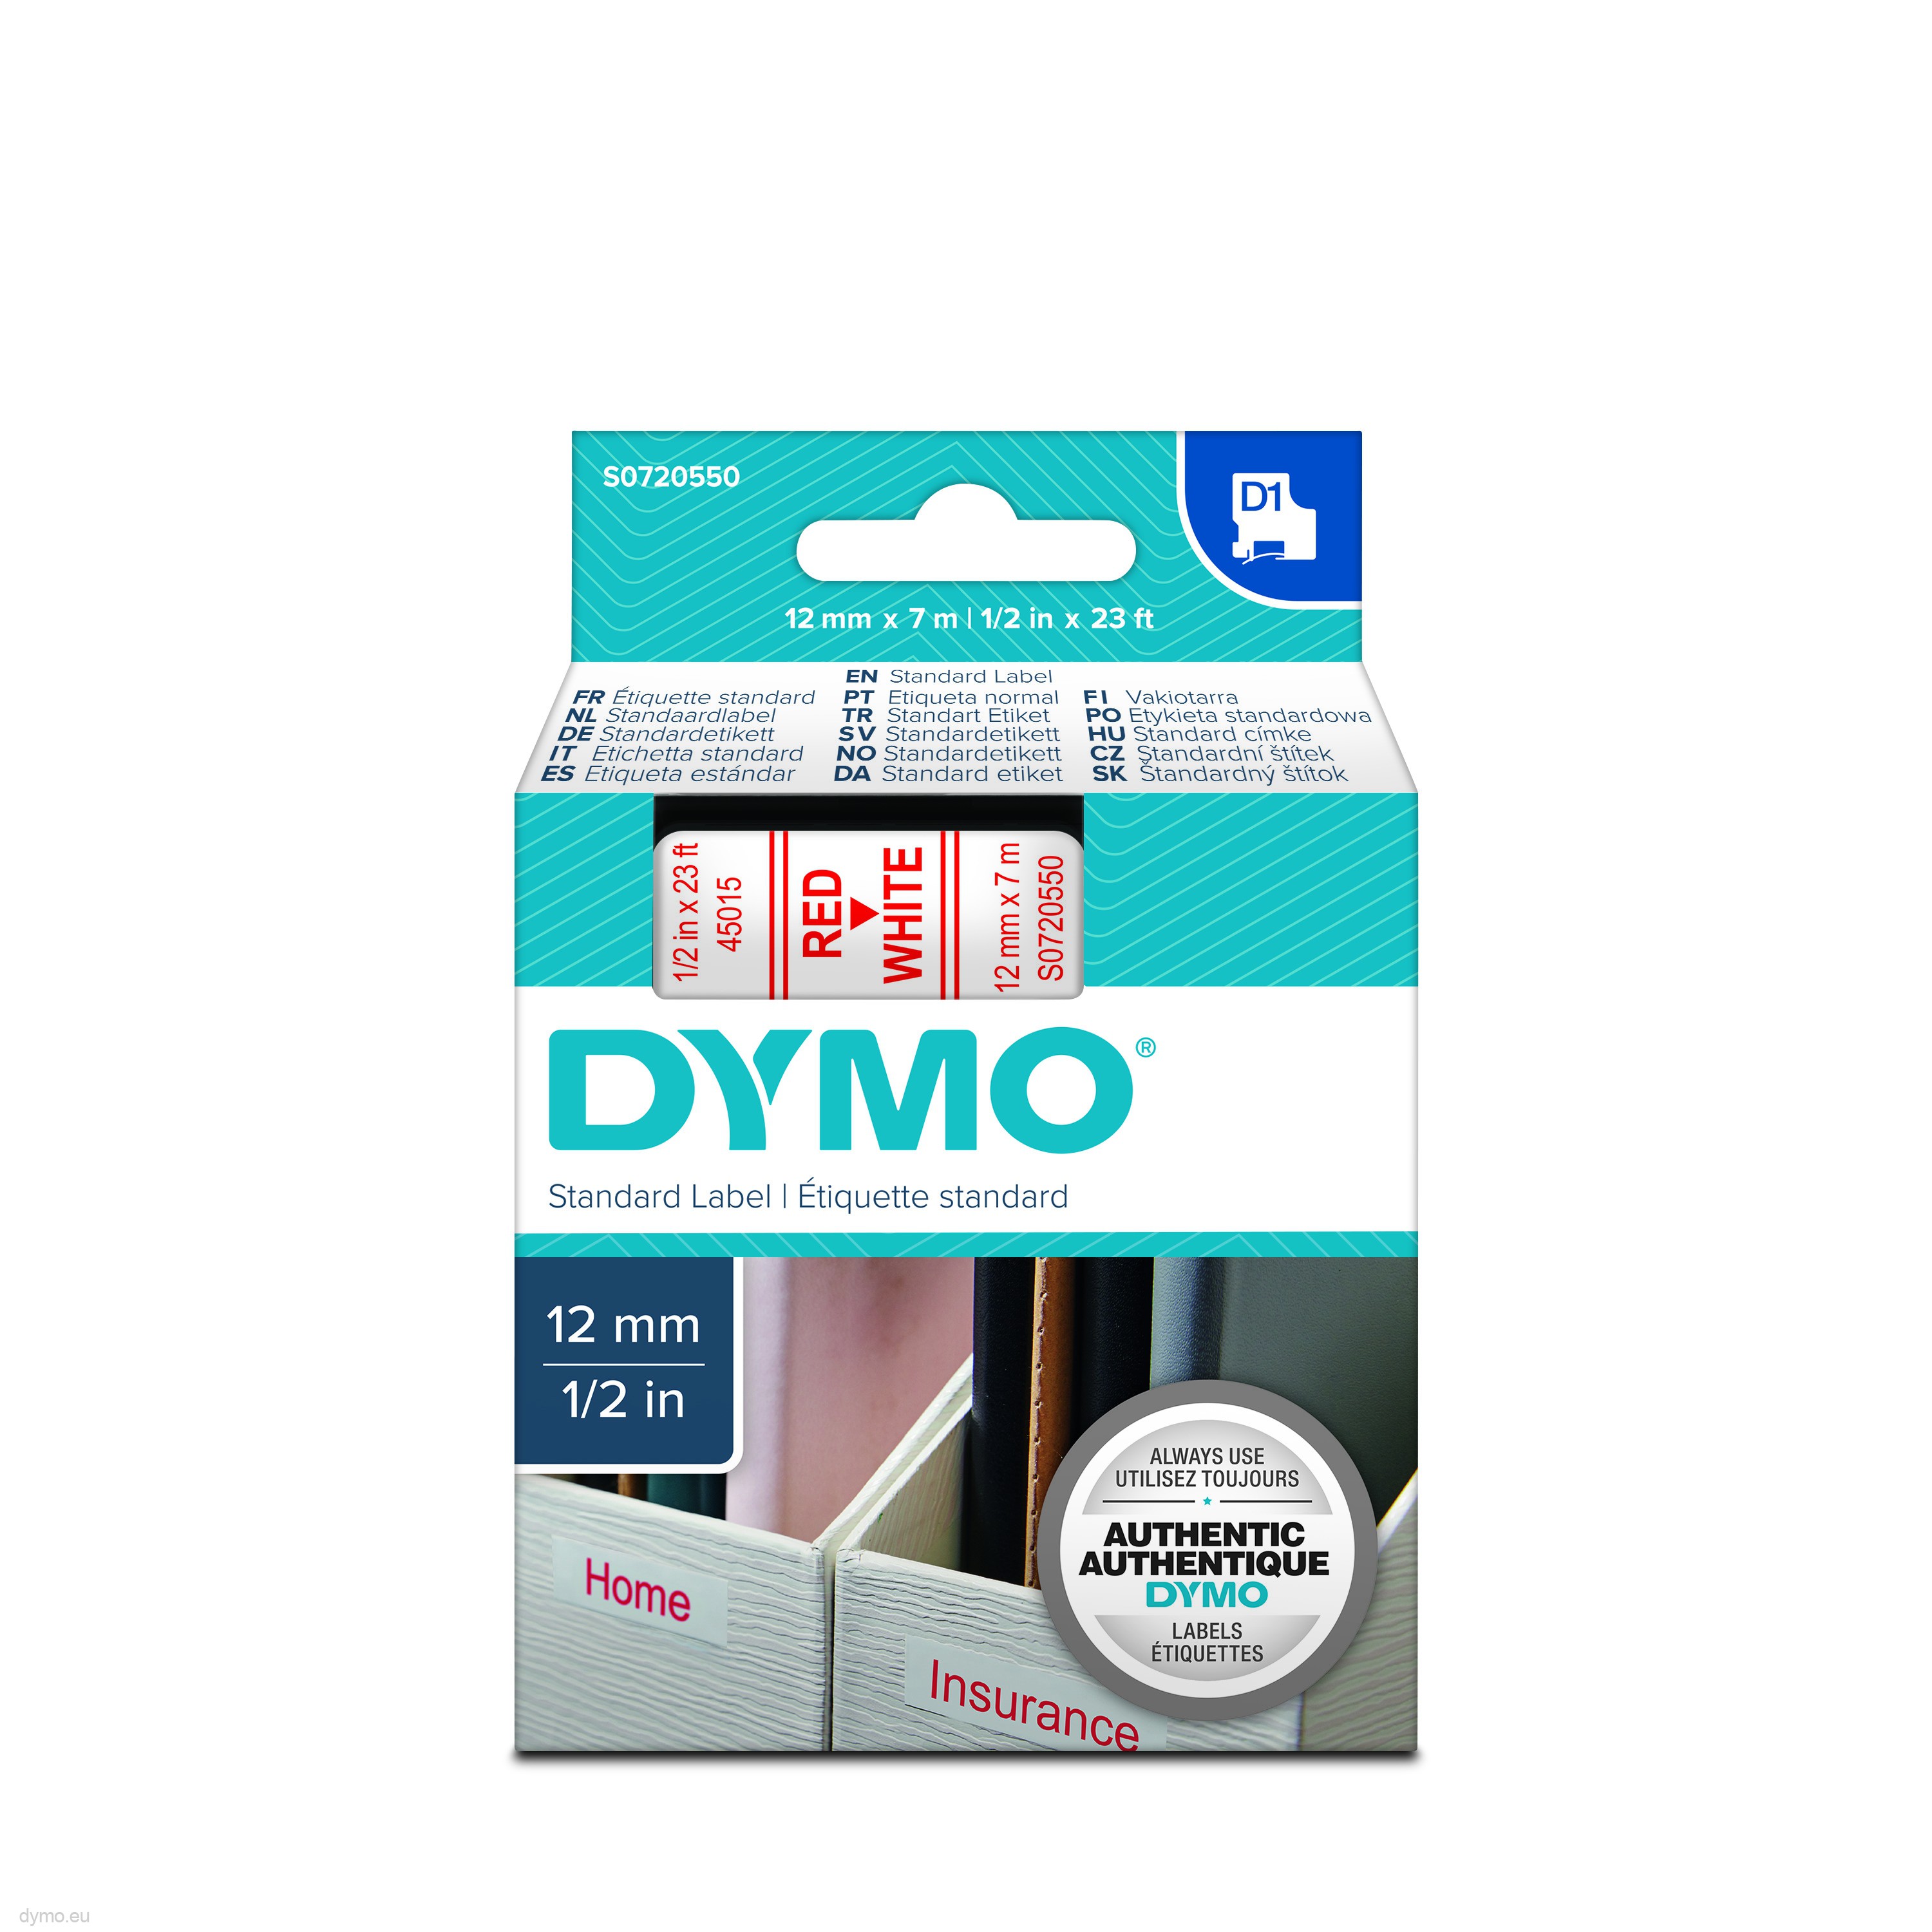 2PK White on Clear Adhesive Label Tapes Compatible for DYMO 45020 D1 12mm x 7m 